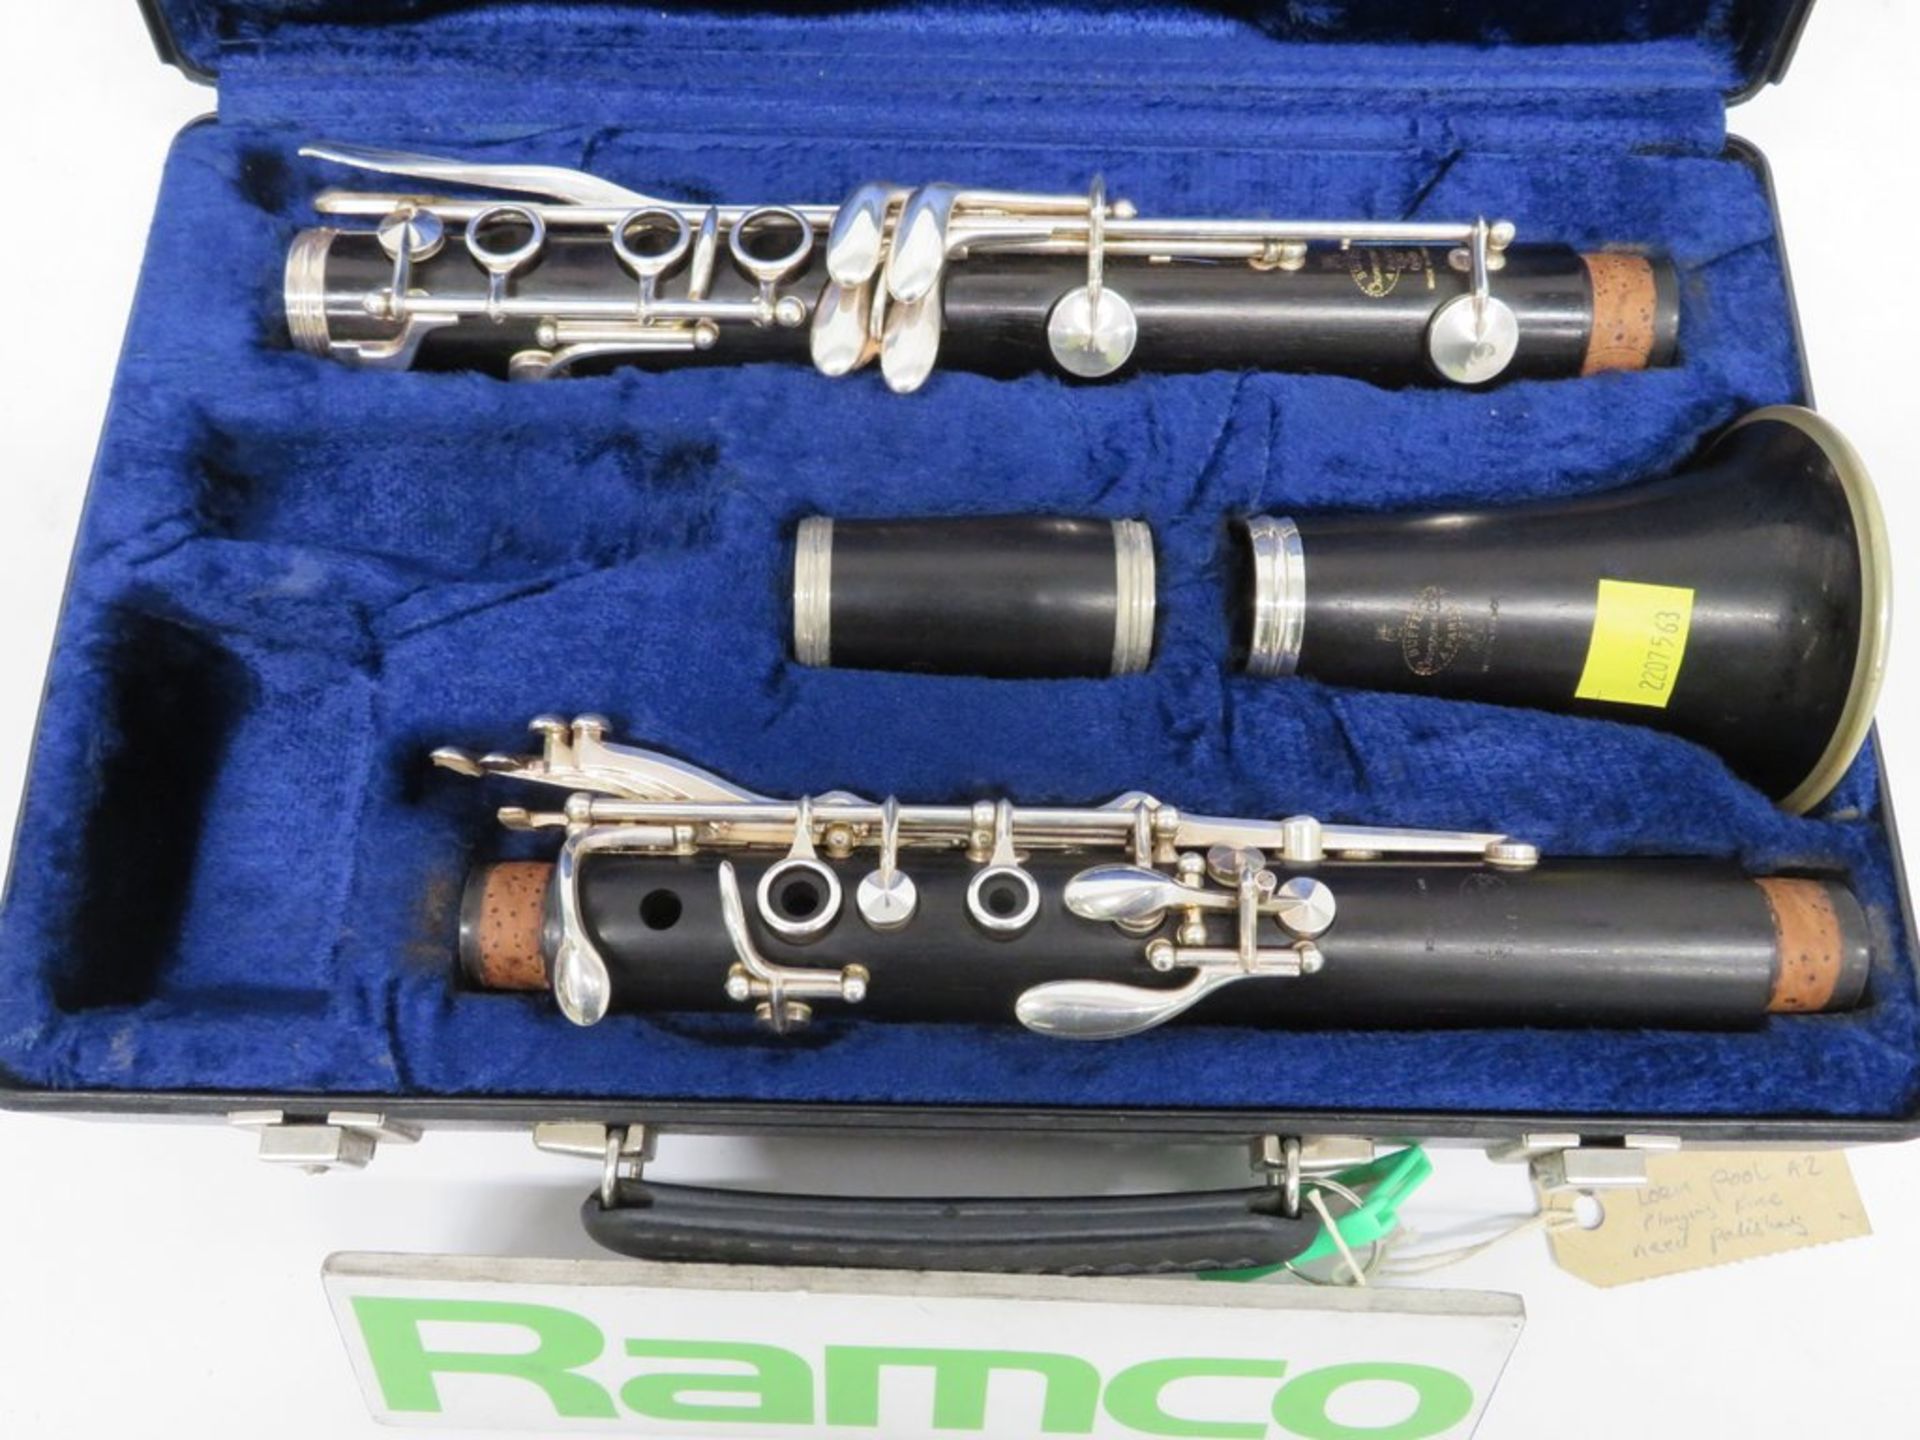 Buffet Crampon R13 Clarinet With Case. Serial Number: 386372. Full Length 63cm. Please No - Image 2 of 14